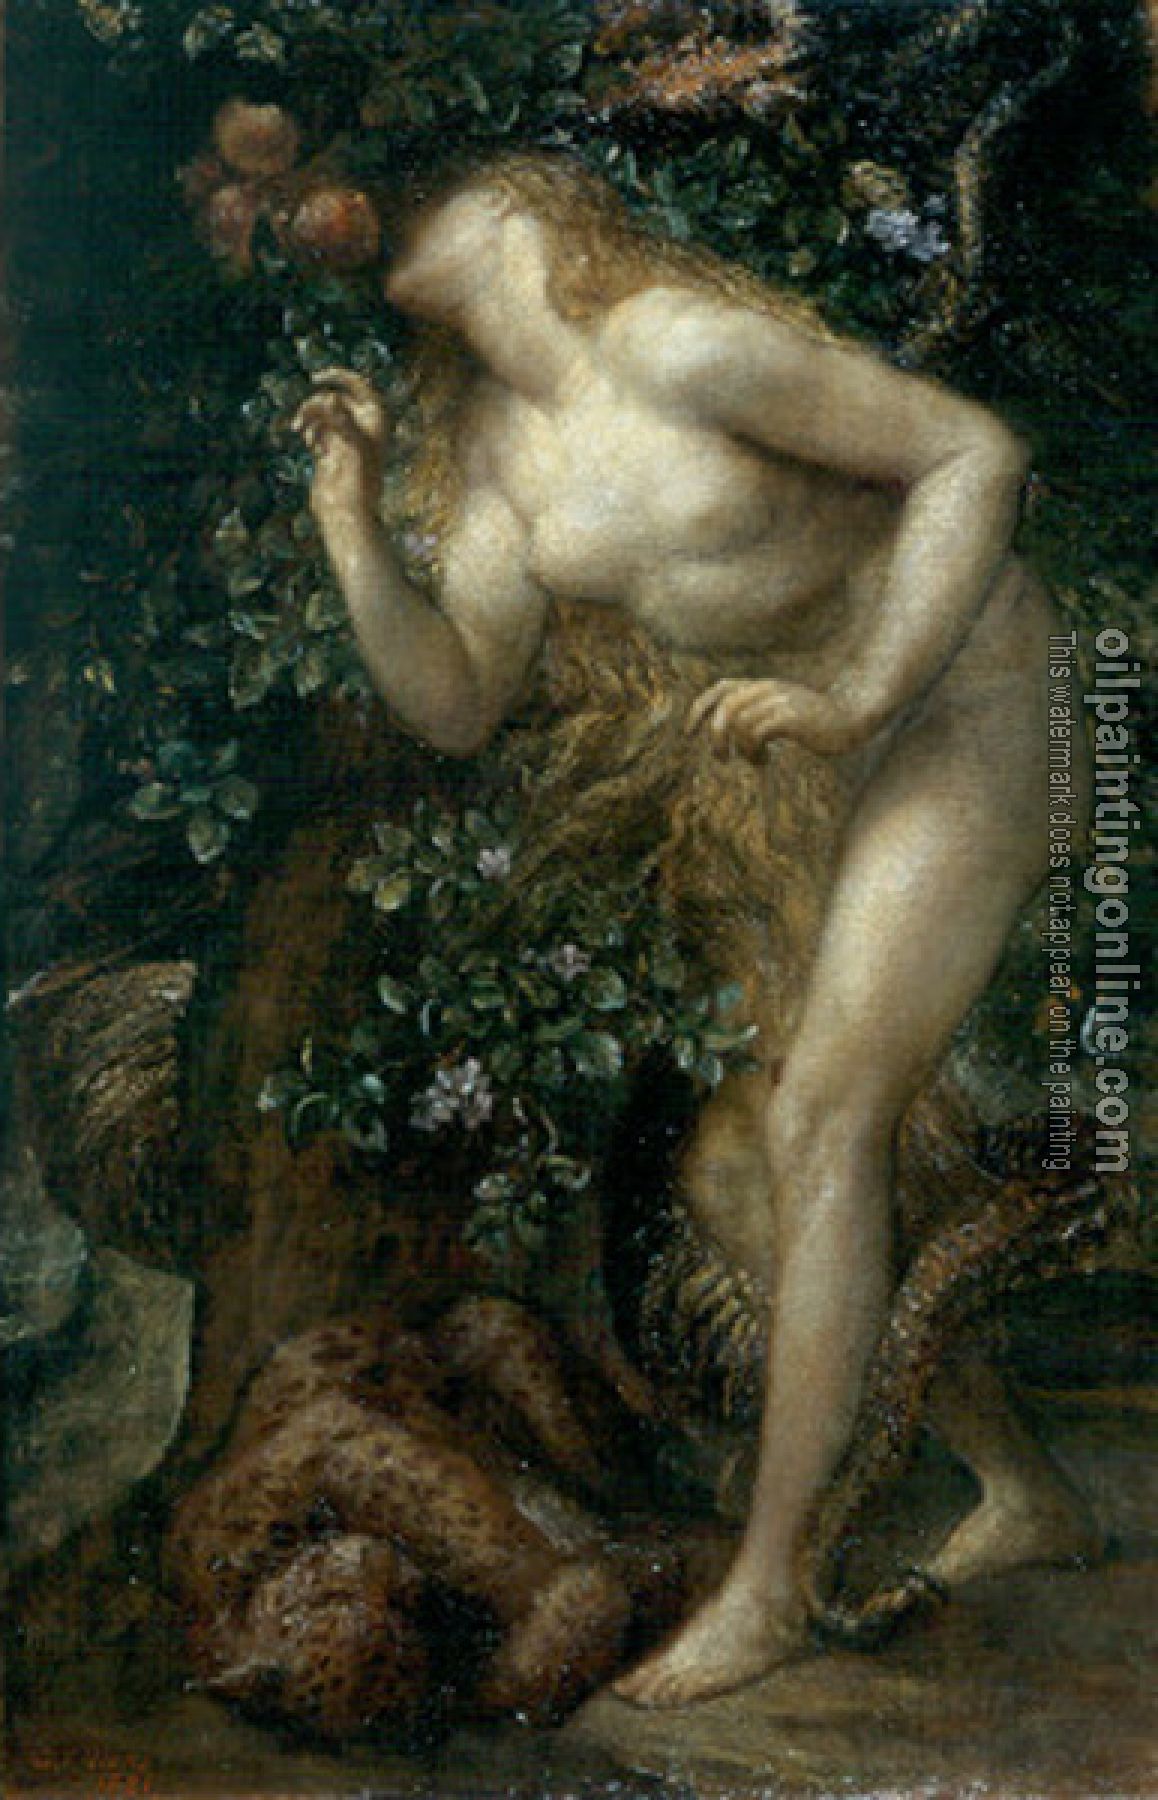 Watts, George Frederick - Eve Tempted